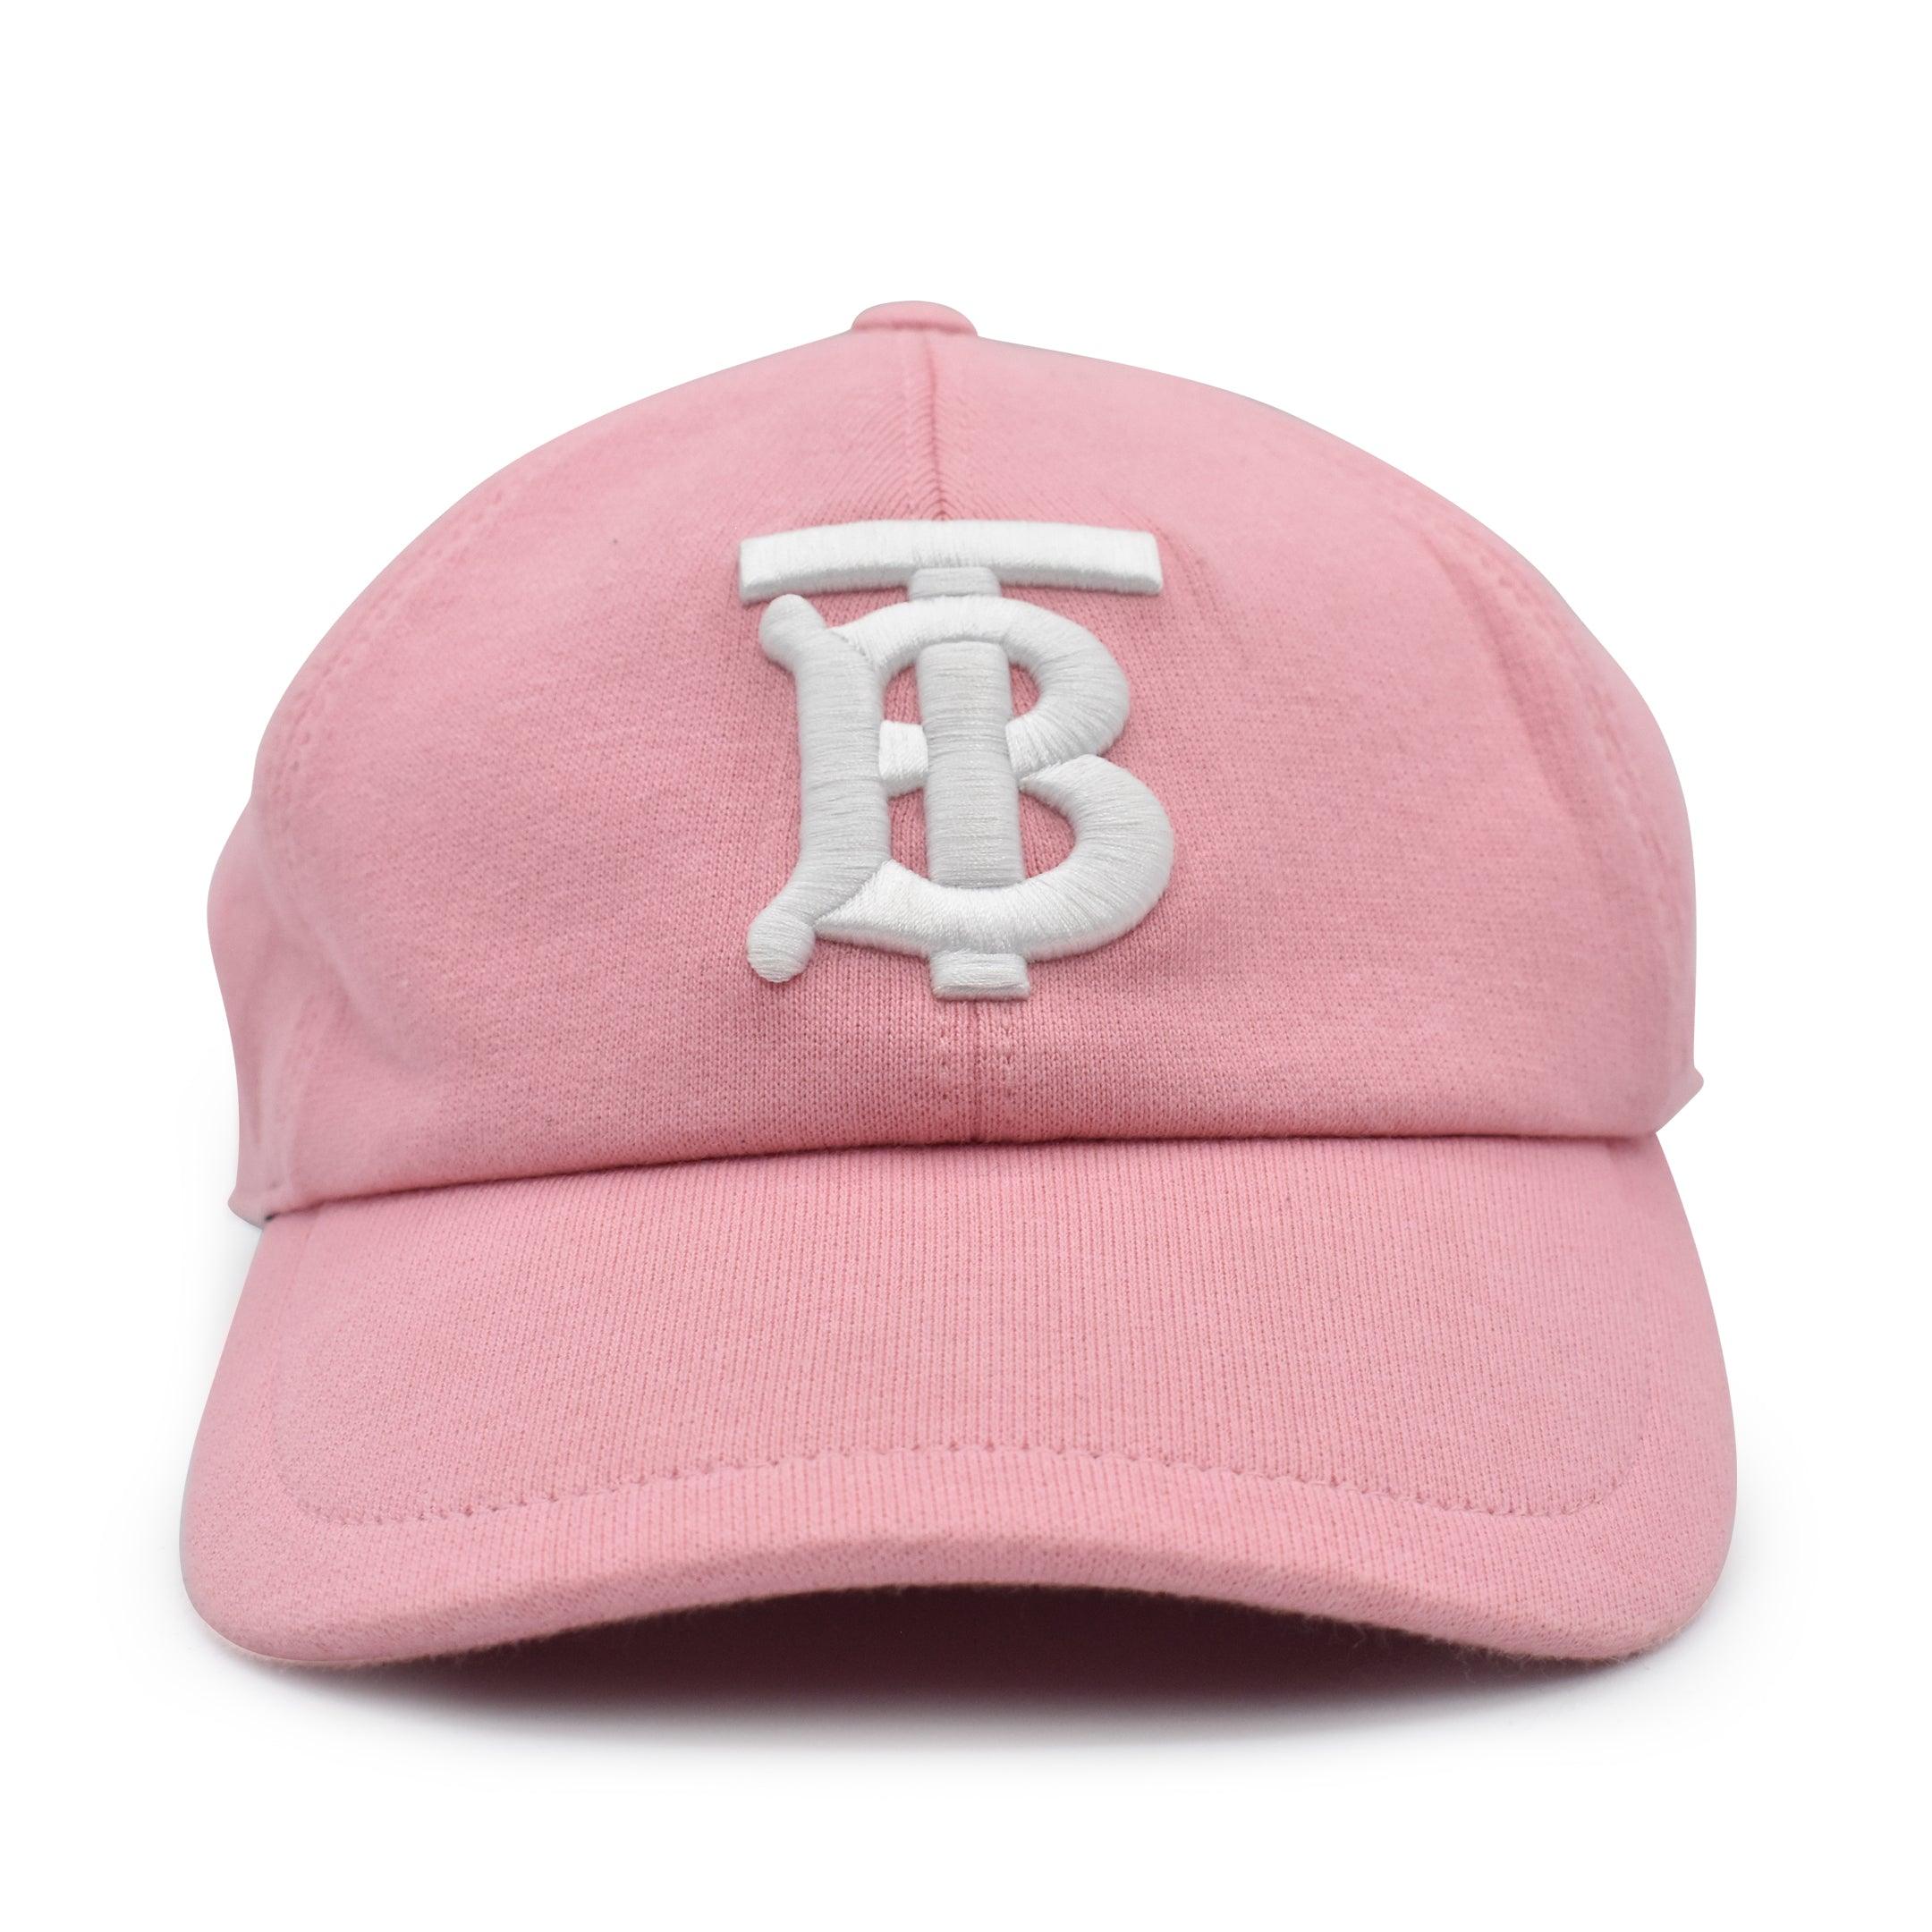 Burberry Baseball Hat - M - Fashionably Yours